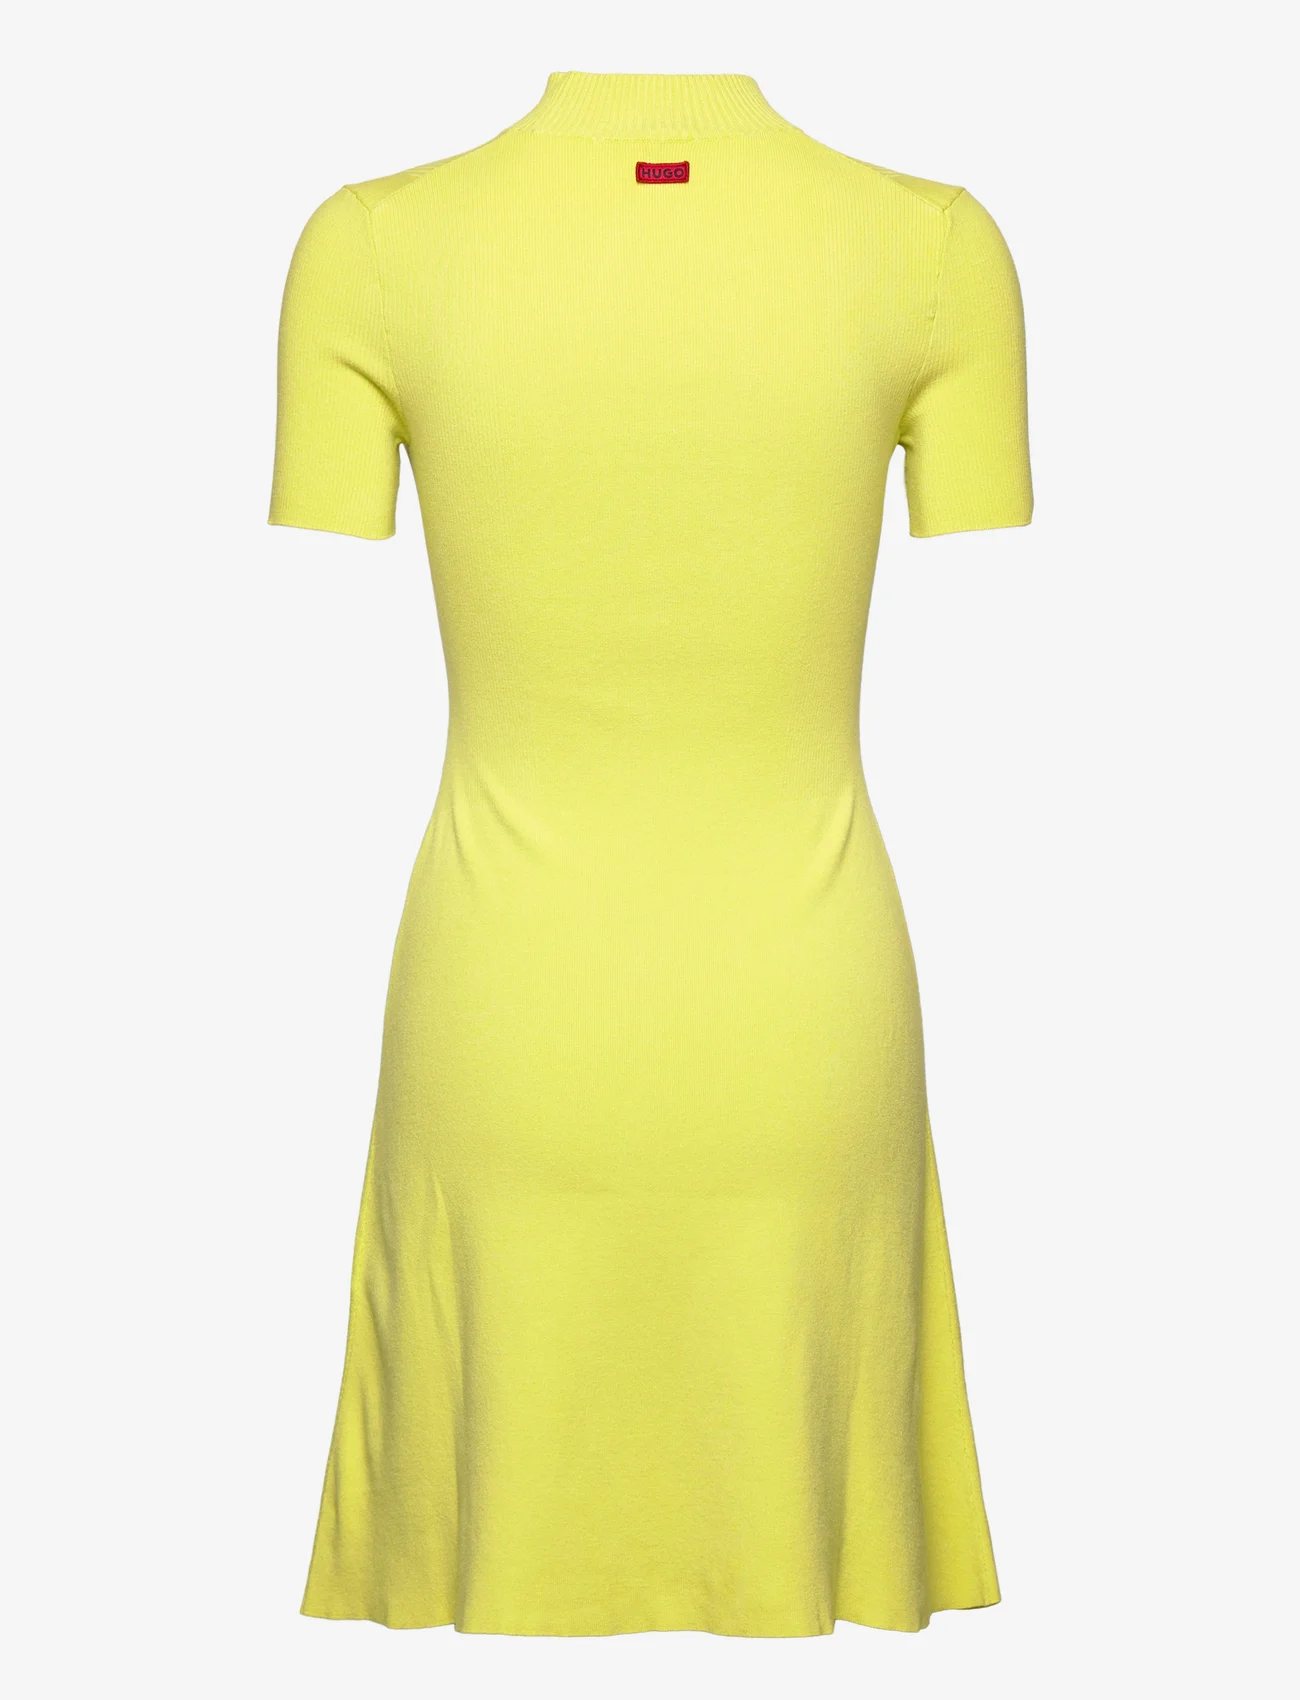 HUGO - Sharizy - knitted dresses - bright yellow - 1